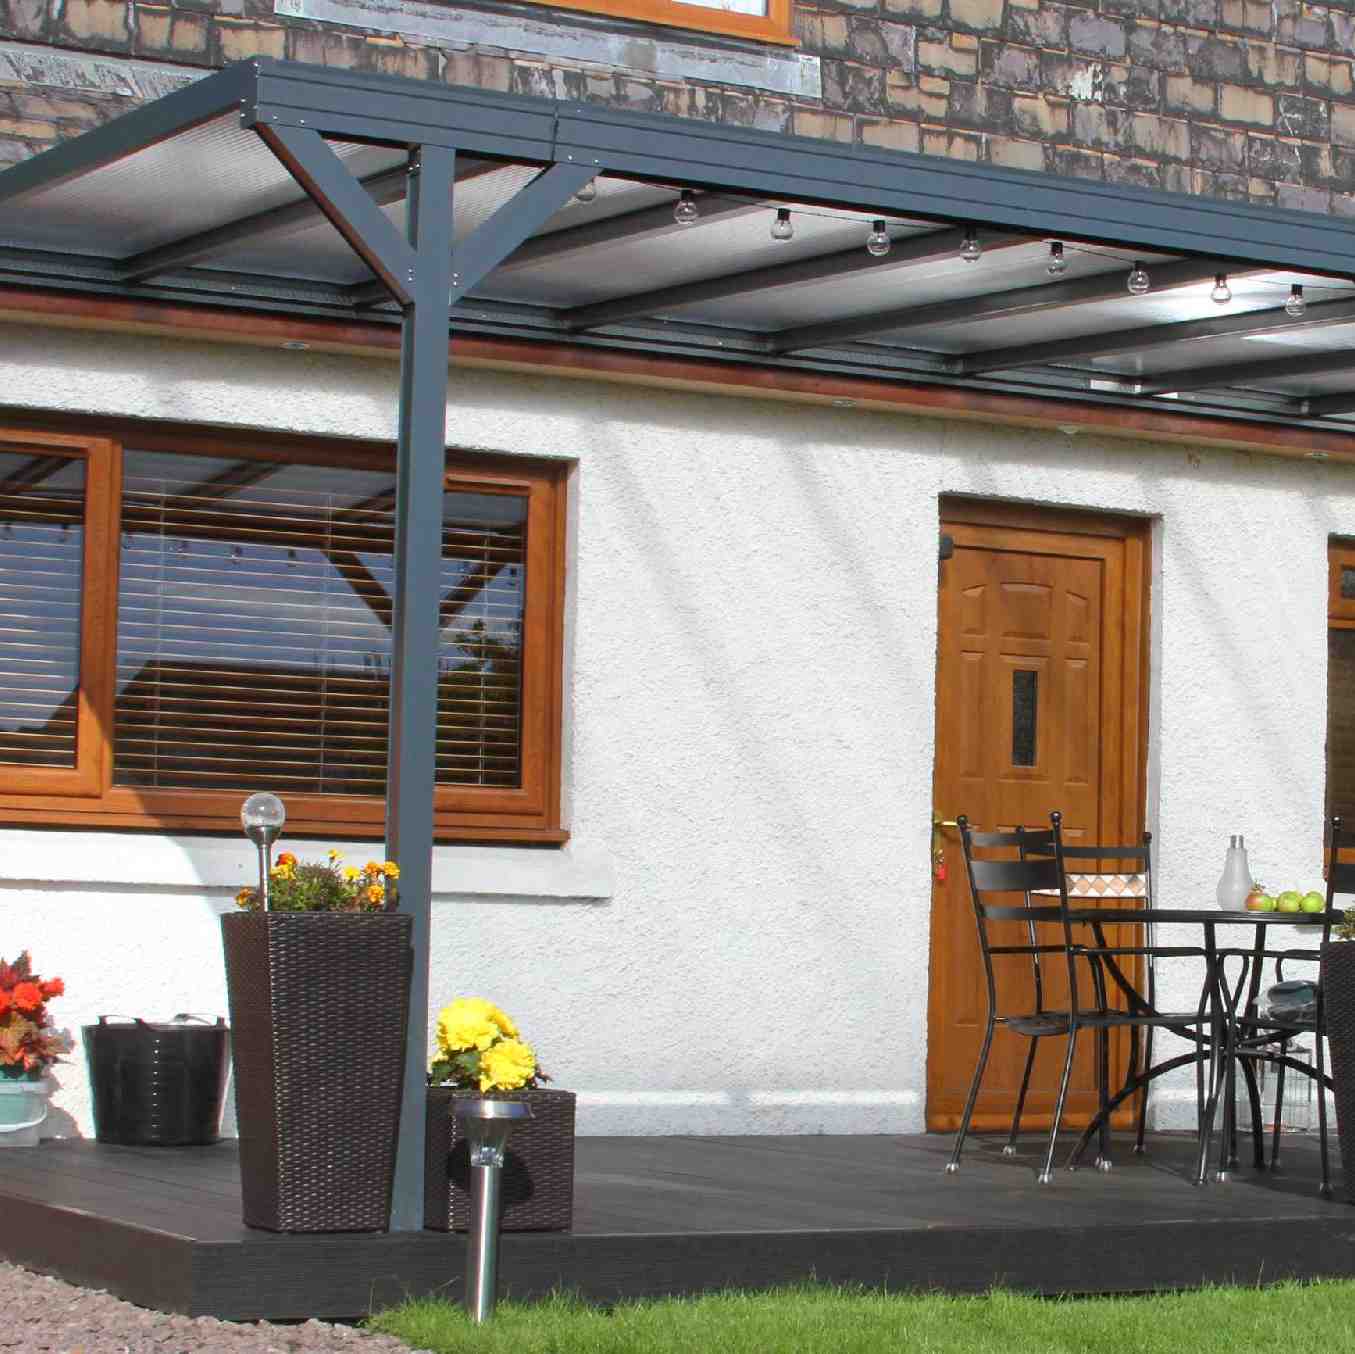 Omega Verandah, Anthracite Grey, 6mm Glass Clear Plate Polycarbonate Glazing - 7.0m (W) x 2.0m (P), (4) Supporting Posts